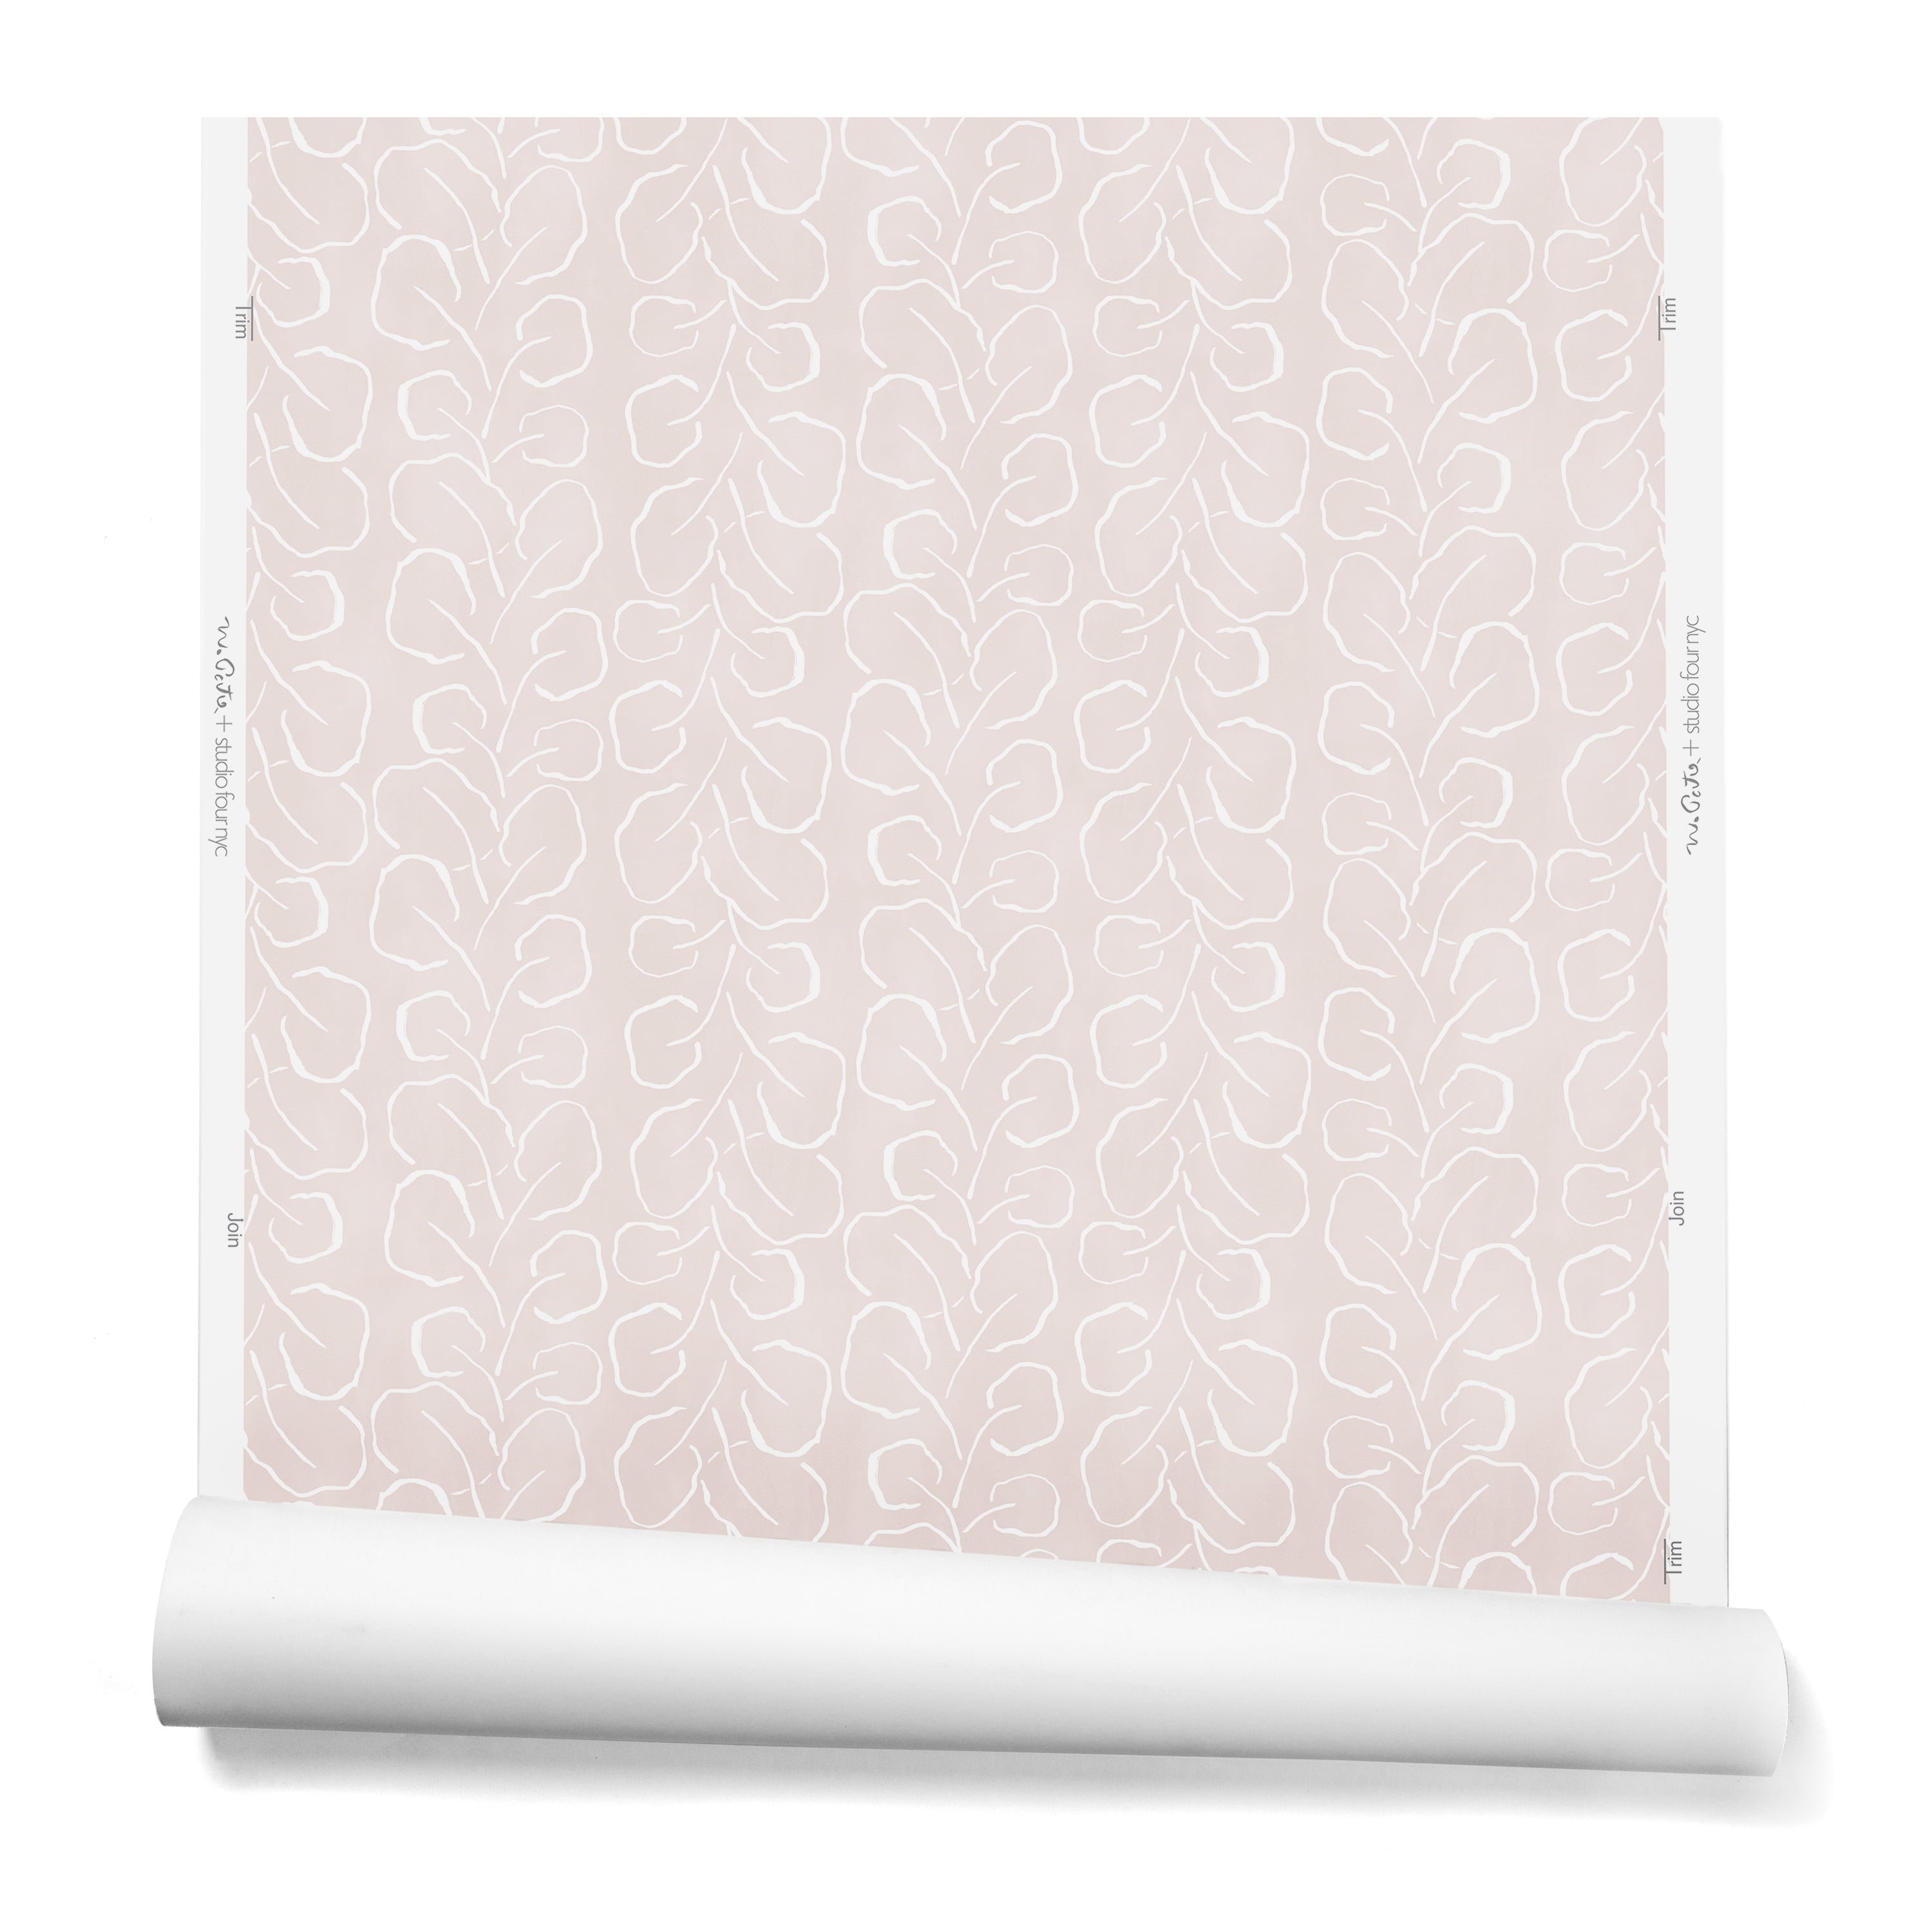 A hanging roll of wallpaper with a large-scale repeating leaf print in white on a light pink watercolor background.